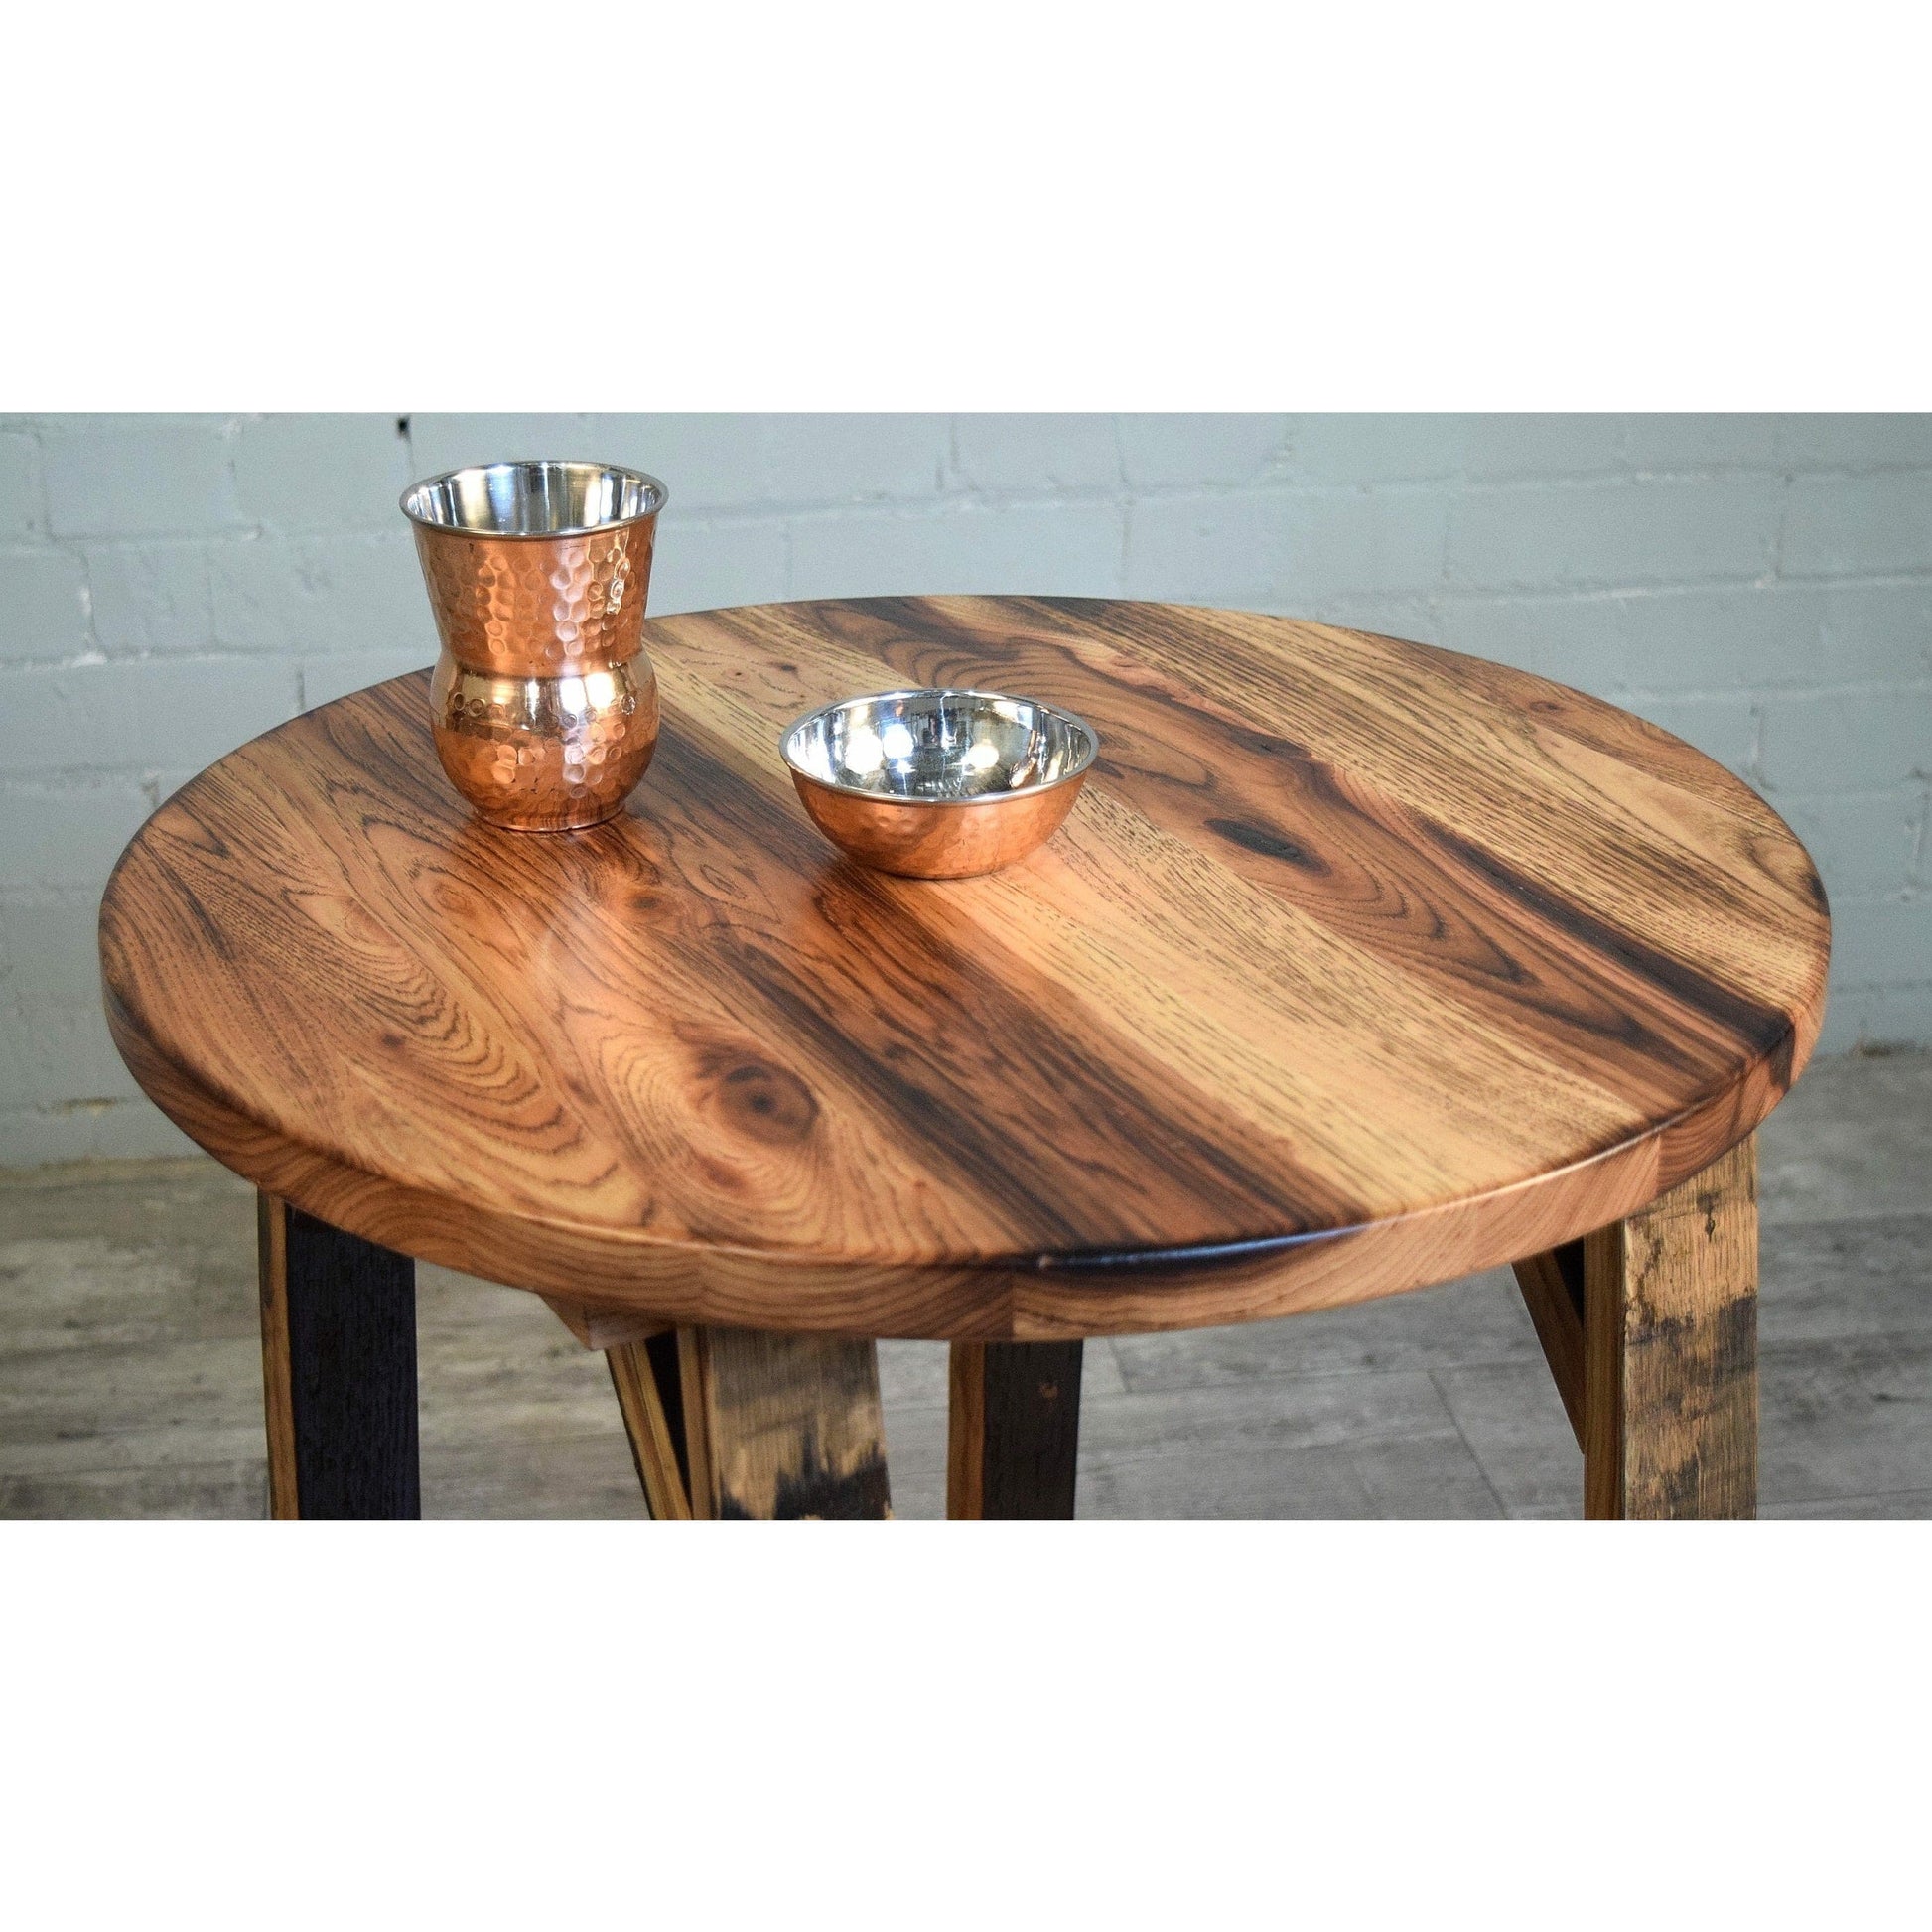 WILLIAM Sheppee USA End Table William Sheppee Shooter's Whiskey Barrel Stave Burnt Hickory End Table- SHO118H